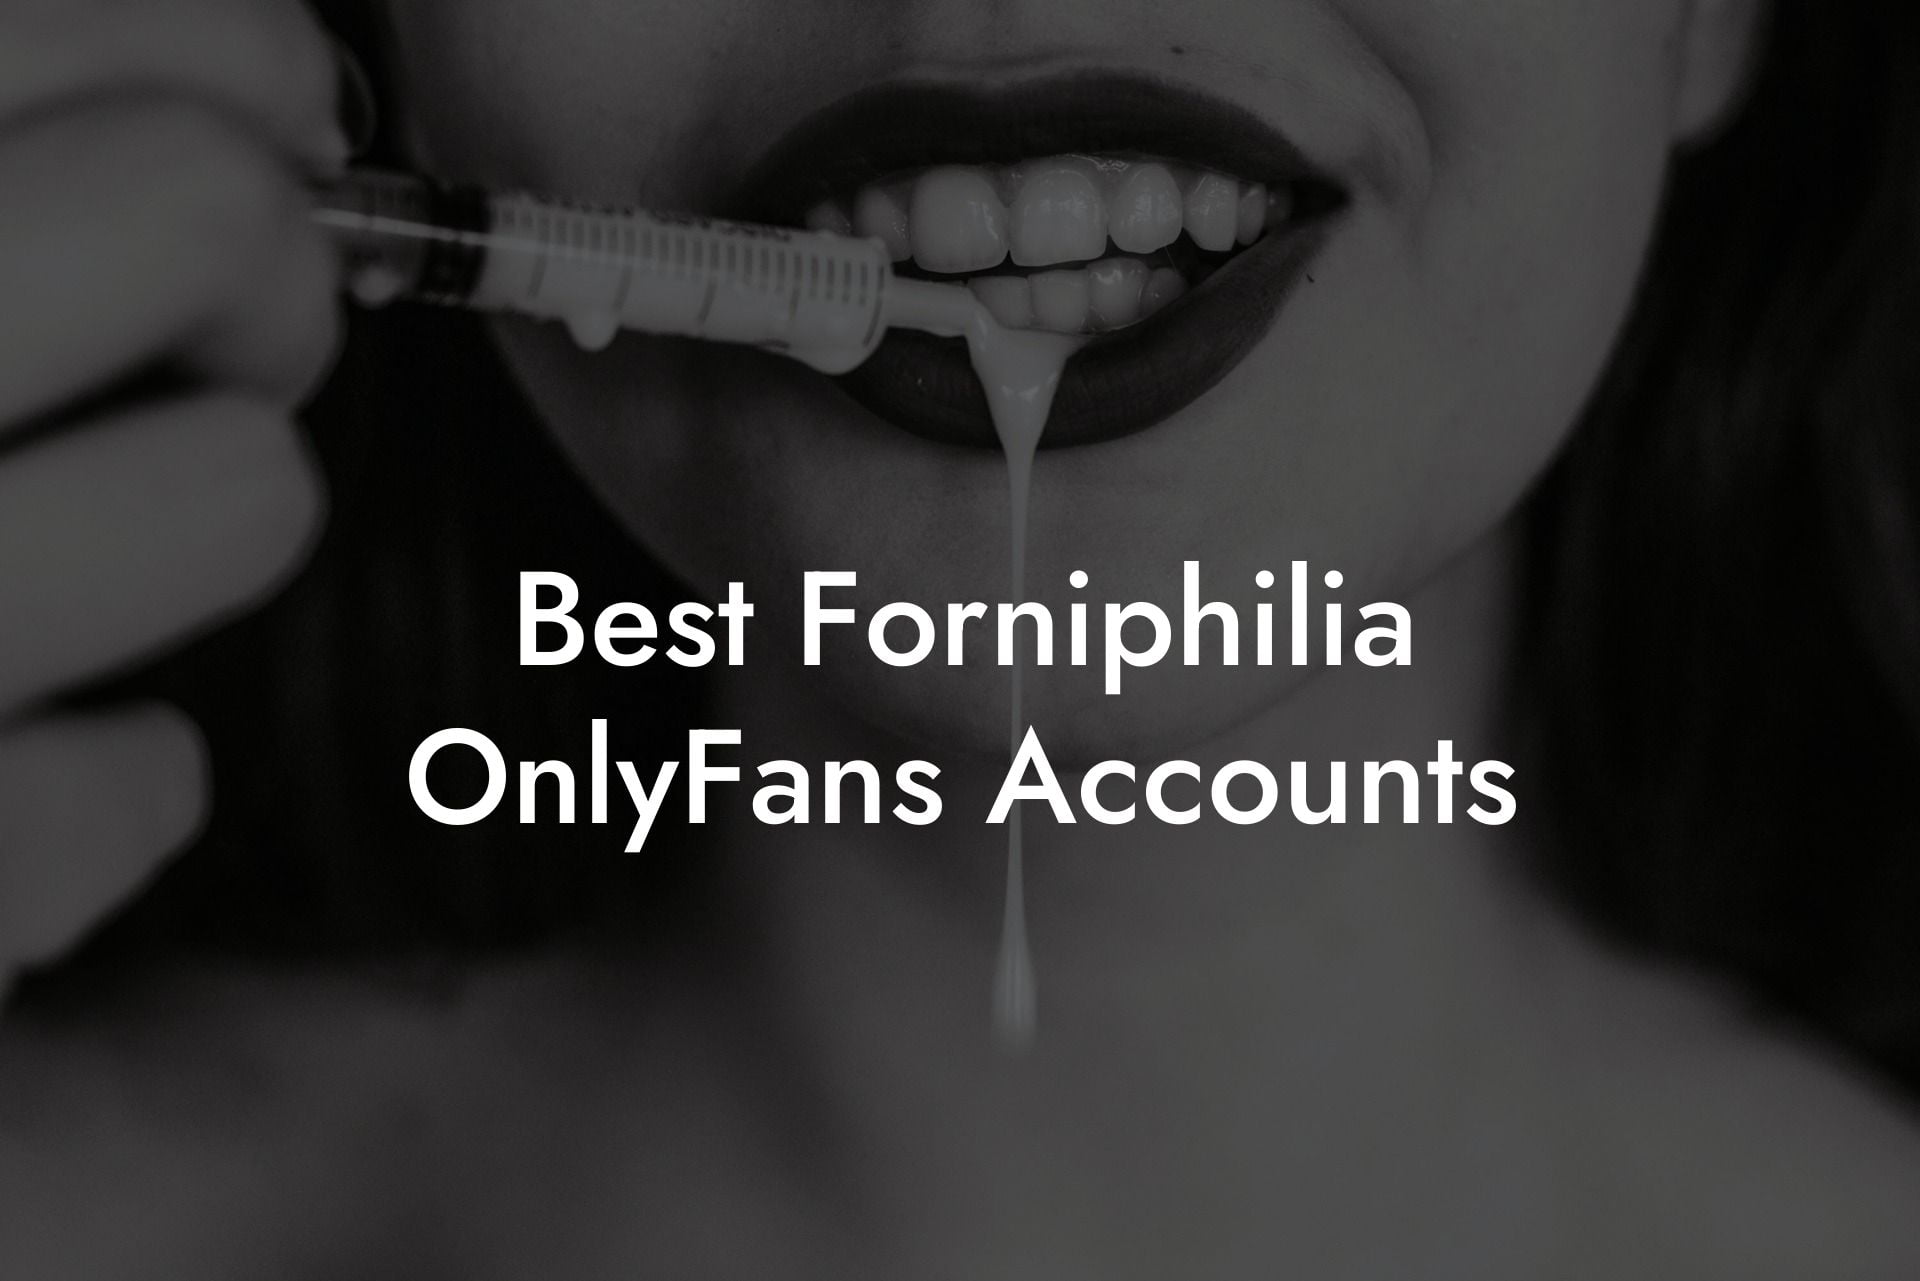 Best Forniphilia OnlyFans Accounts